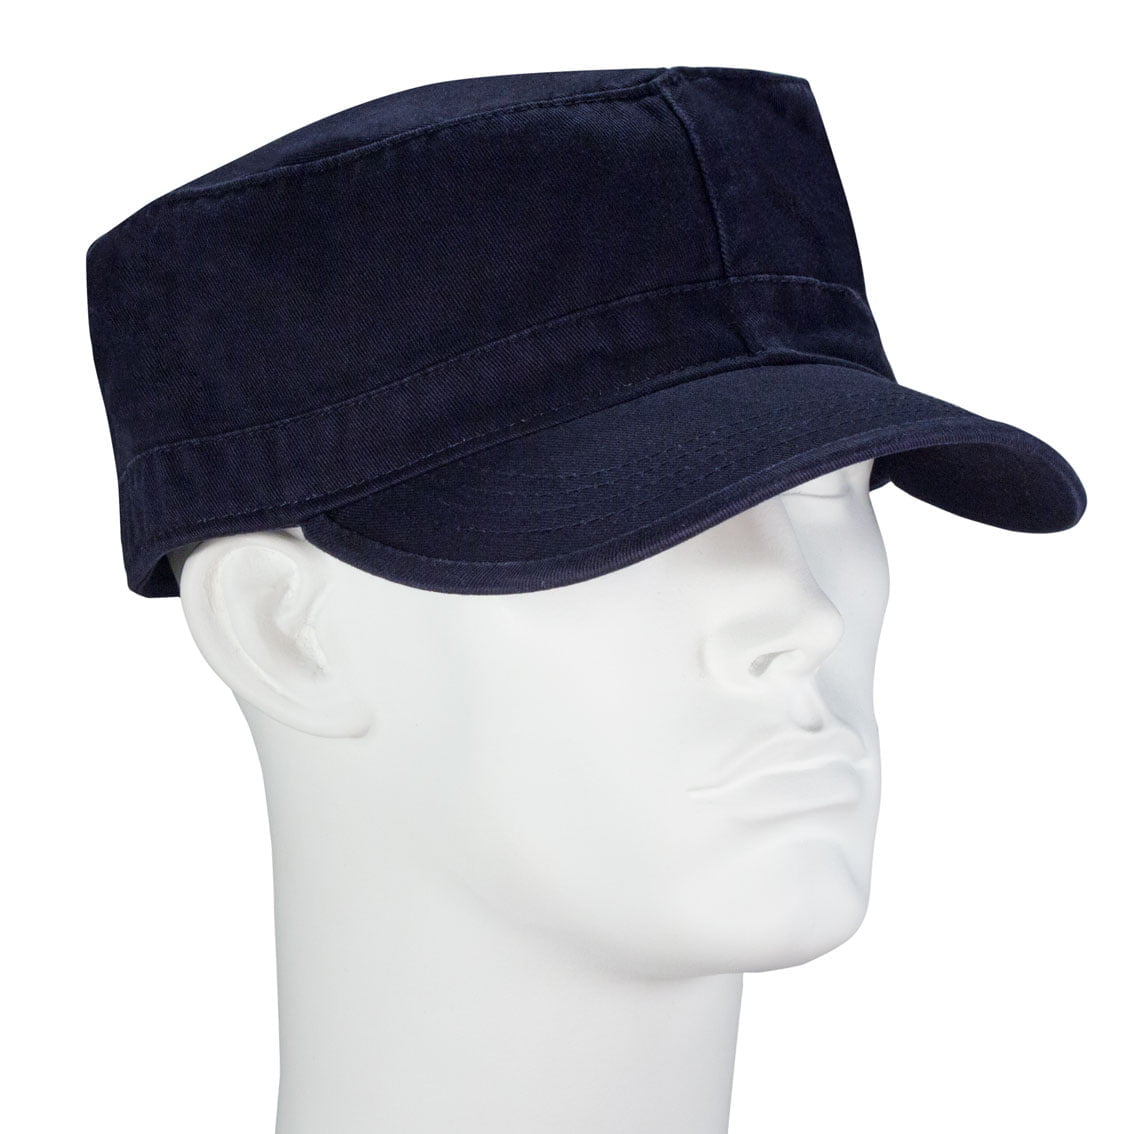 12pcs Navy Solid Castro Military Fatigue Army Hats - Fitted - Unconstructed - 100% Cotton - Bulk by the Dozen - Wholesale